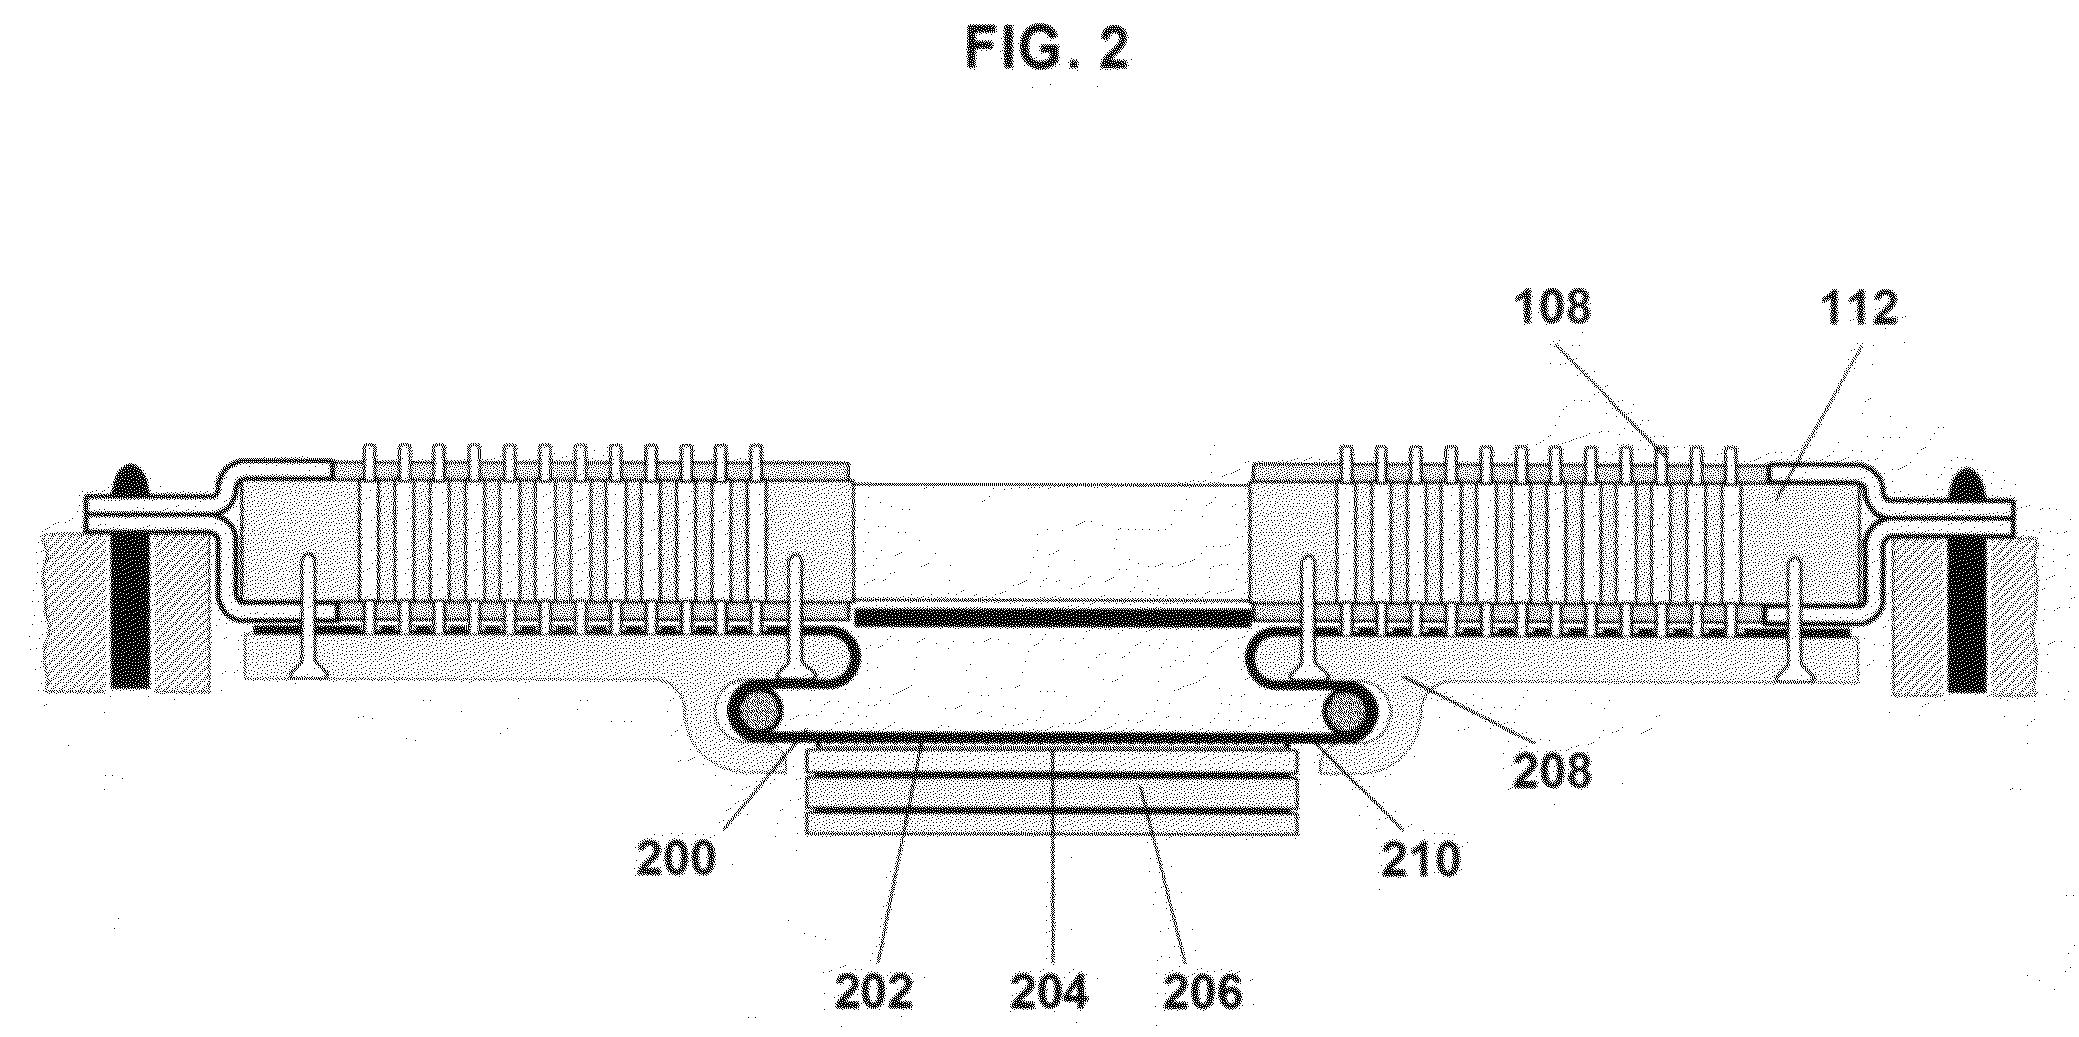 Apparatus for fixed-form multi-planar extension of electrical conductors beyond the margins of a substrate